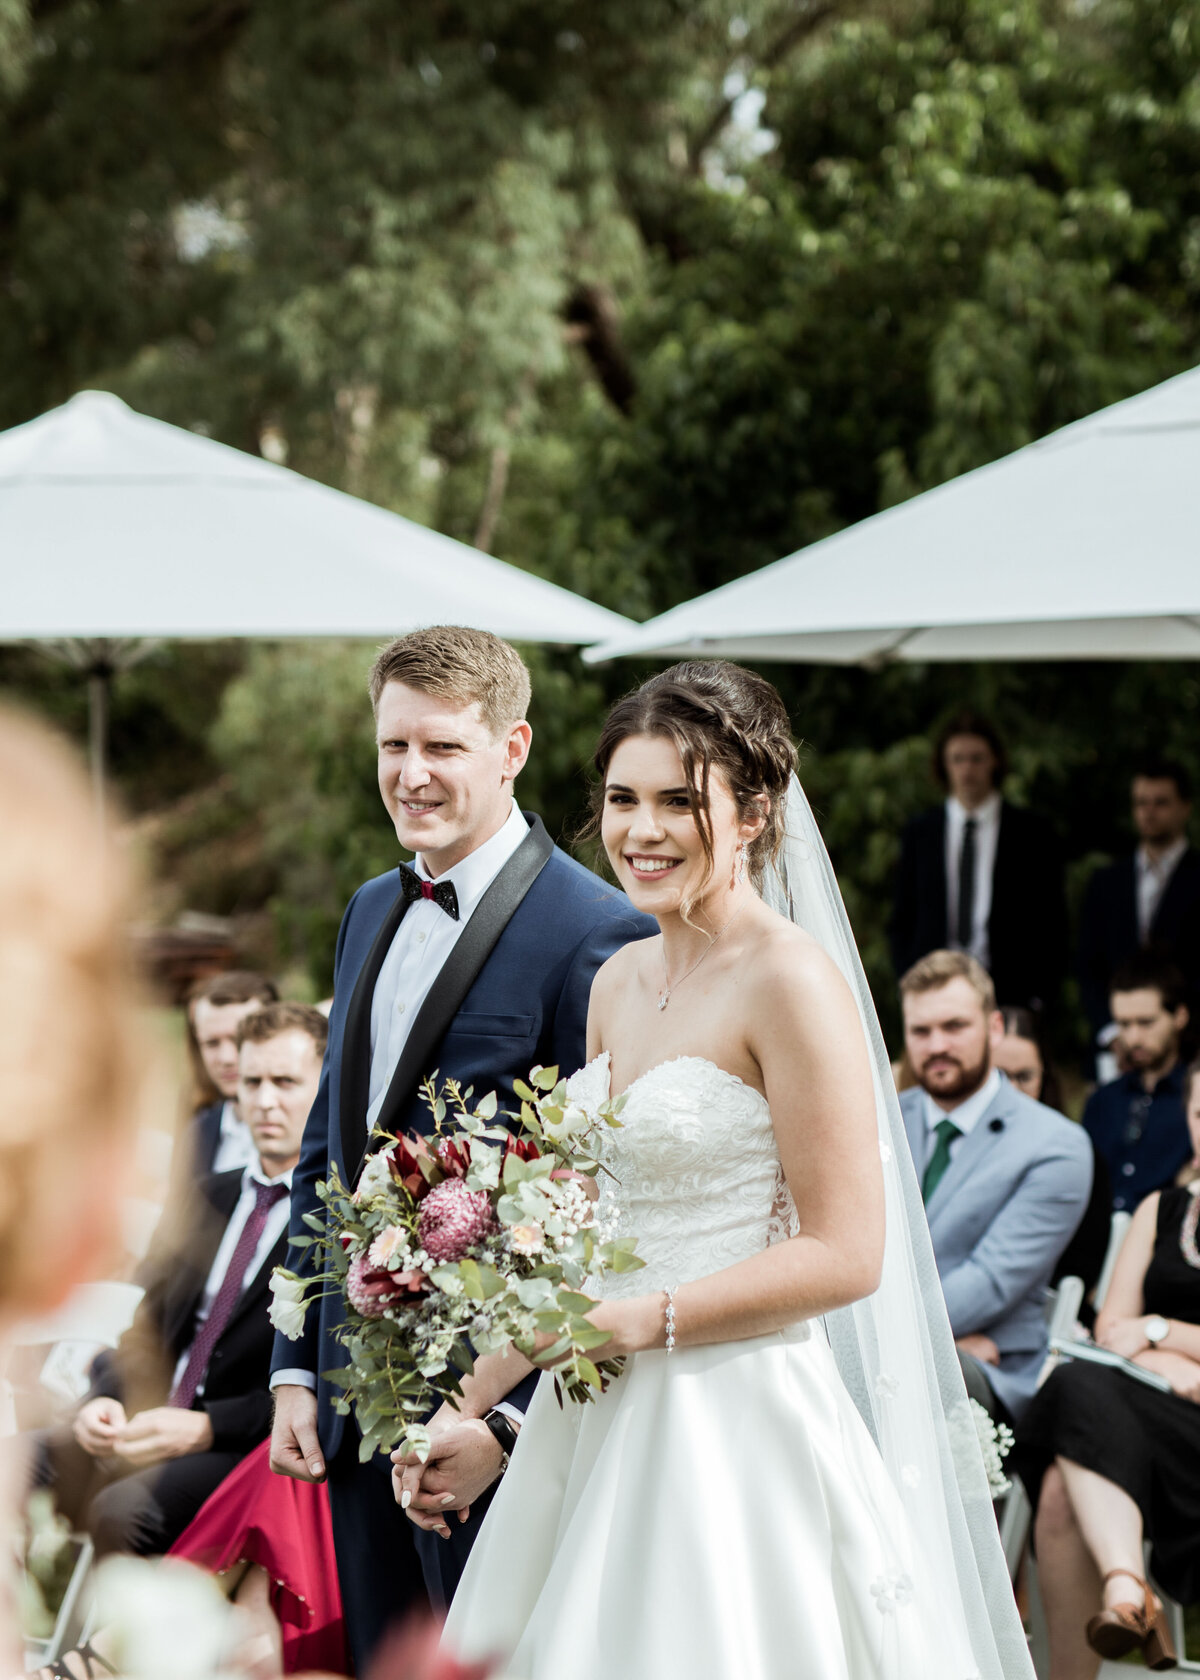 M&R-Anderson-Hill-Rexvil-Photography-Adelaide-Wedding-Photographer-359